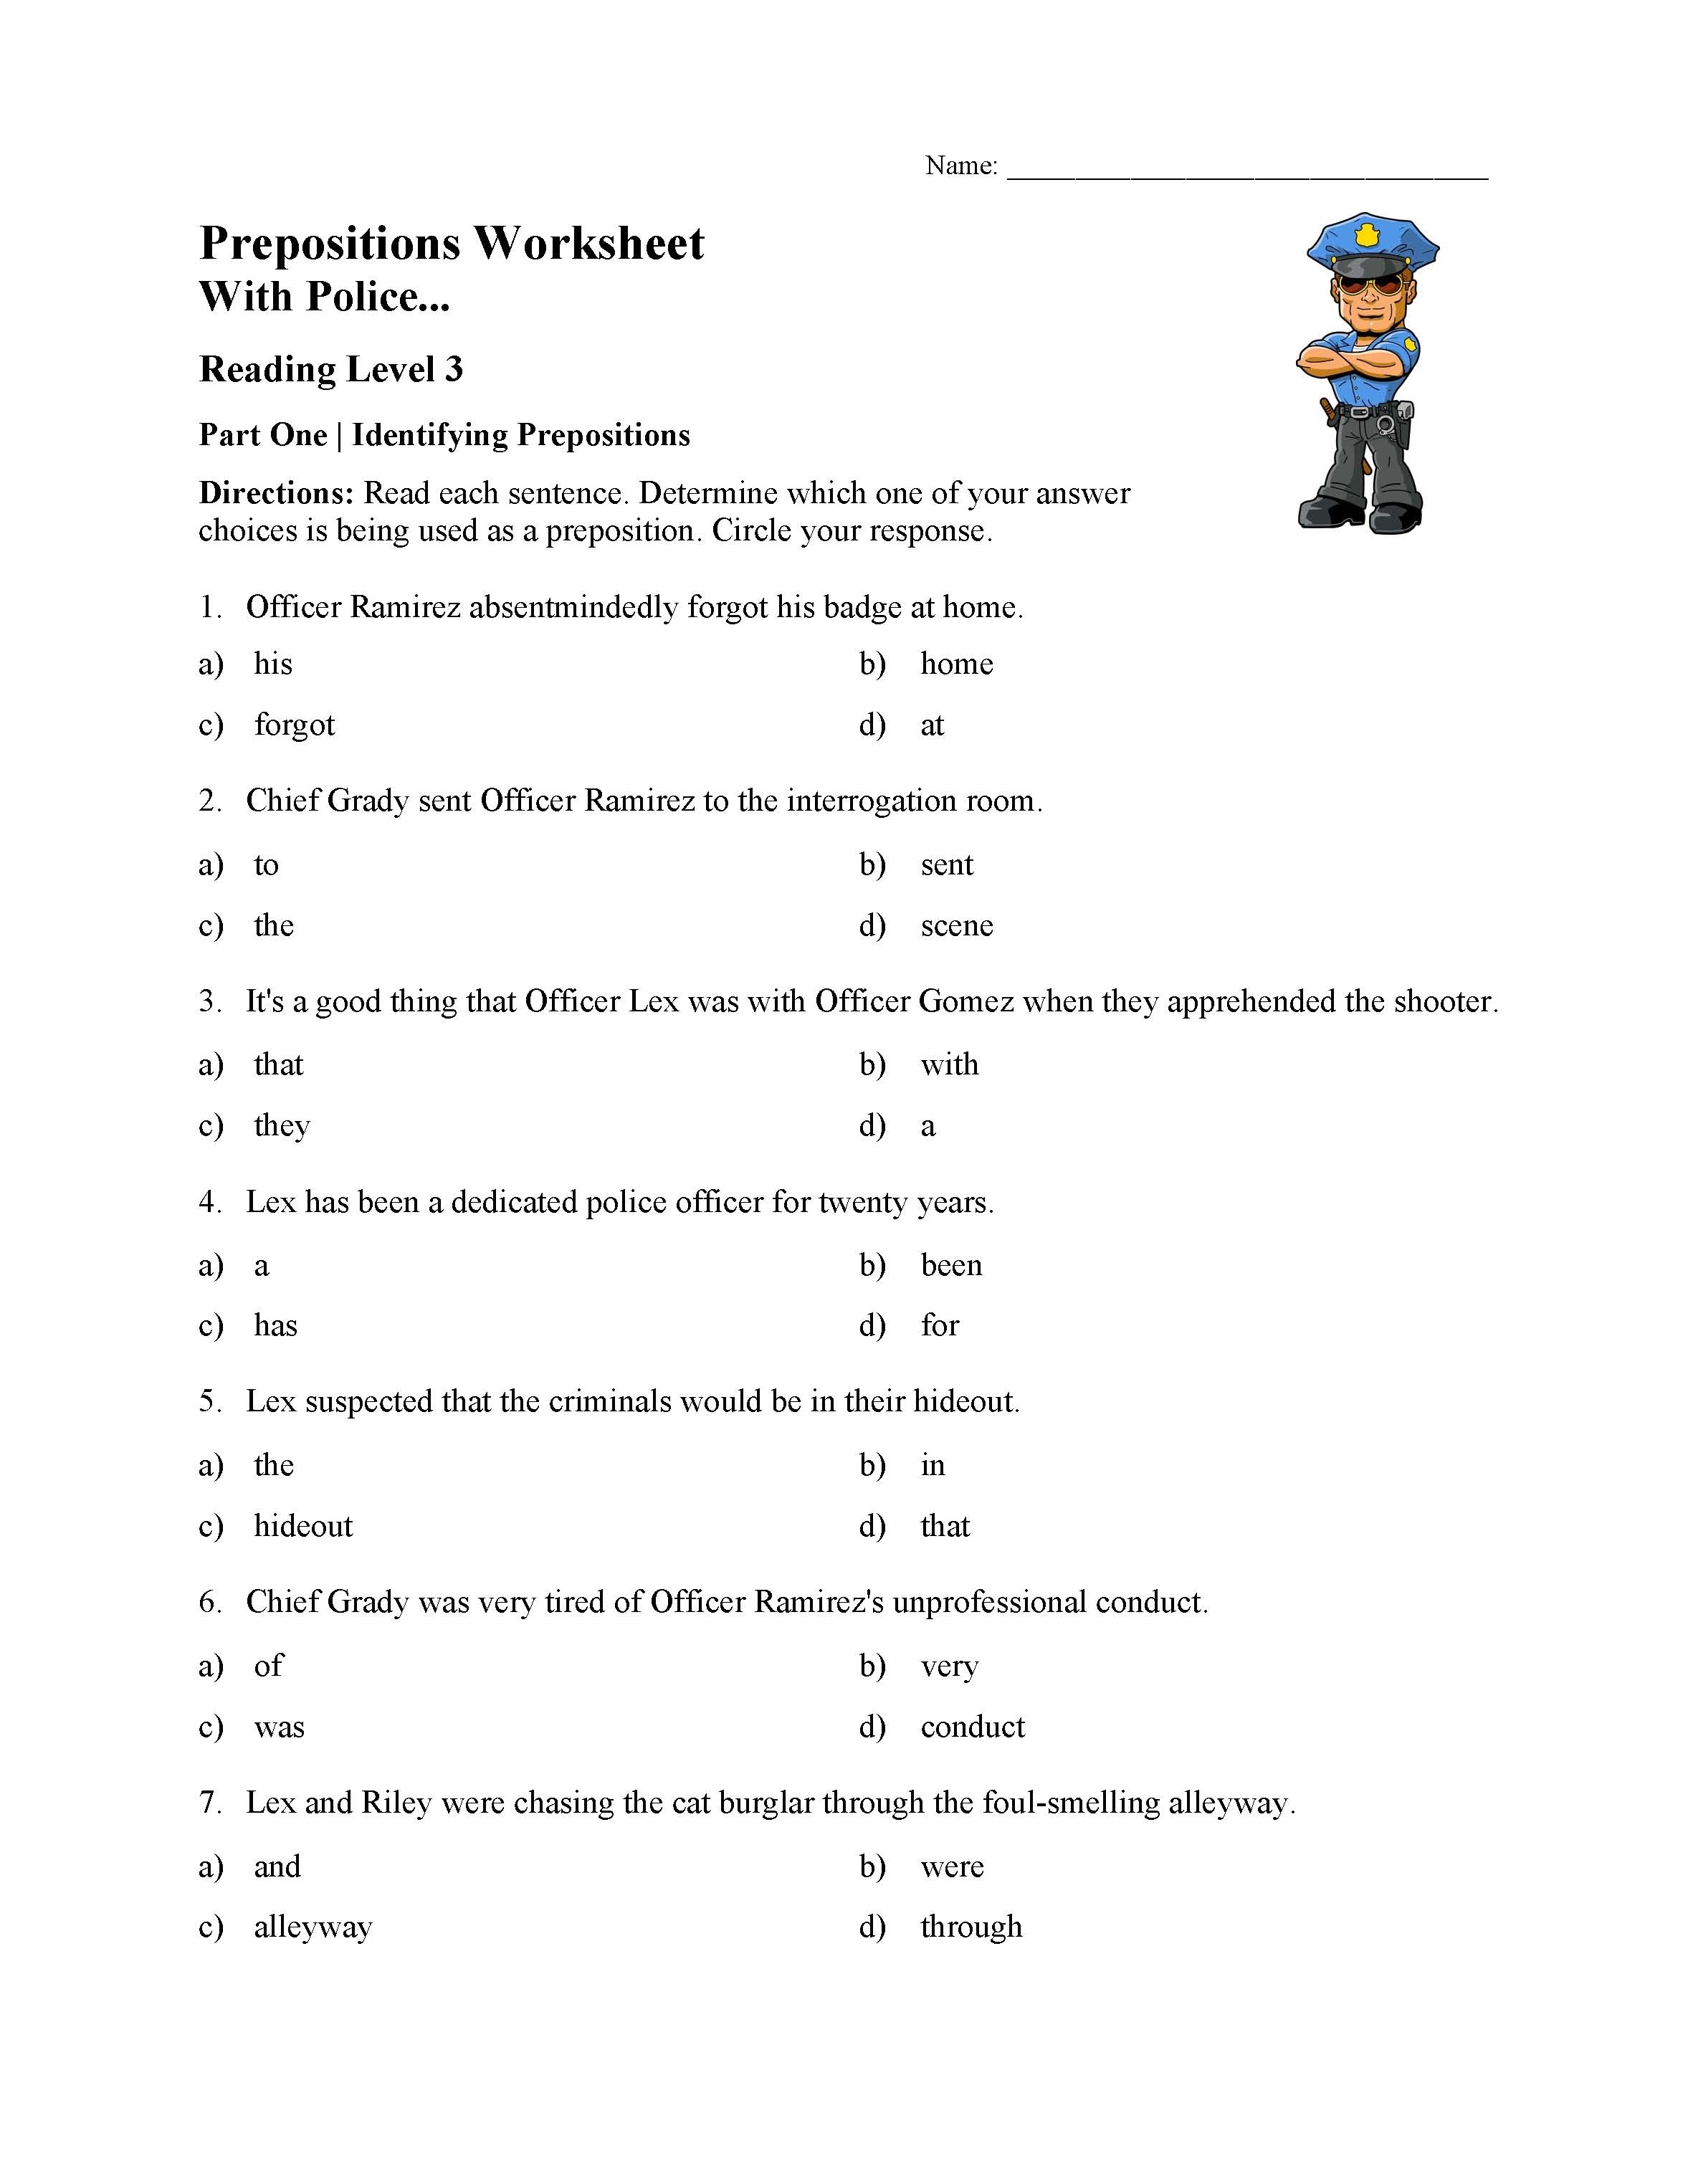 This is a preview image of the Preposition Worksheet 1 - Reading Level 3.